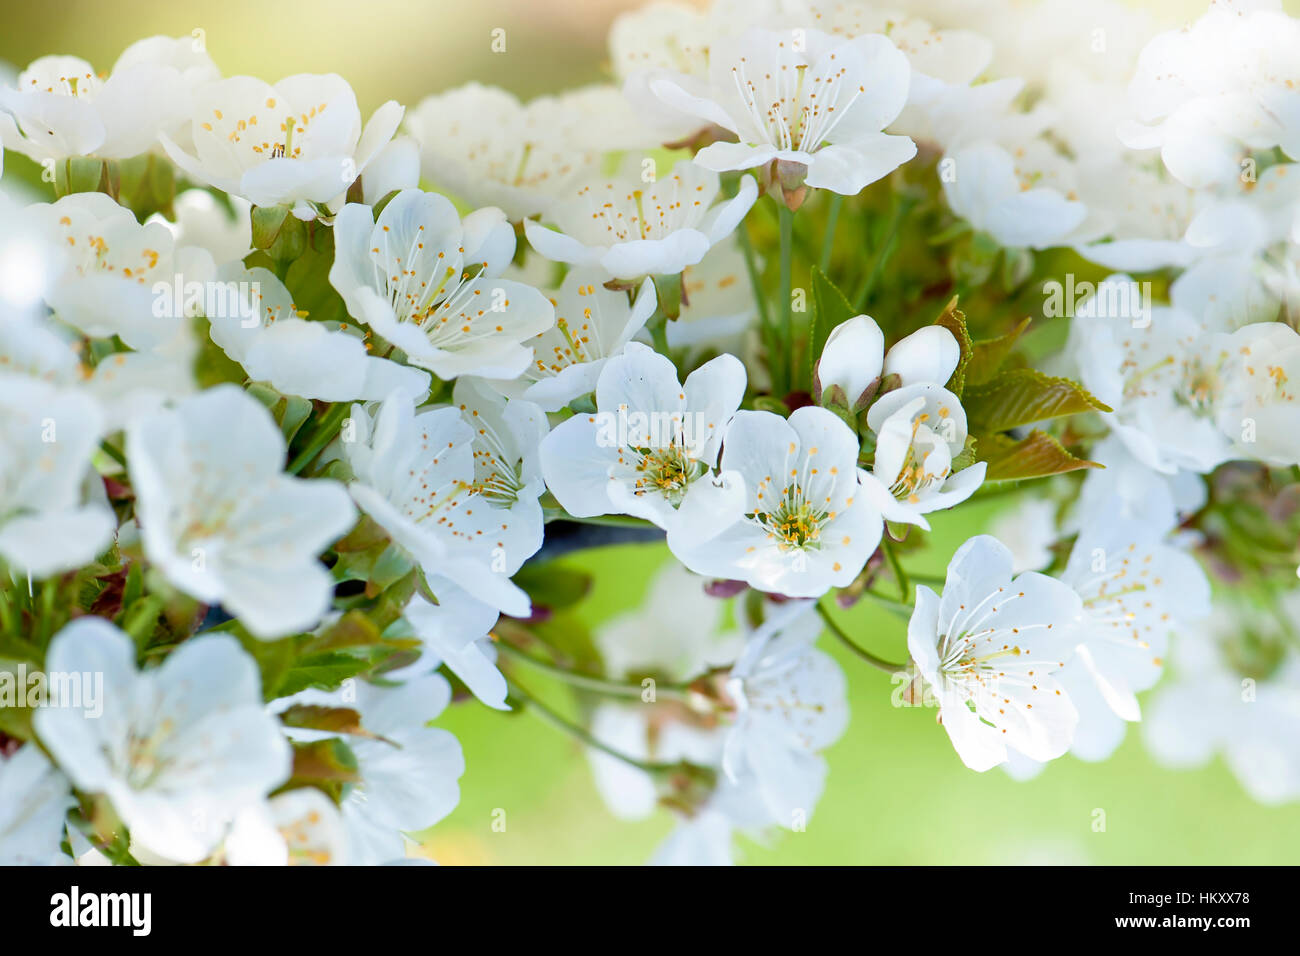 Delicate white blossom flowers of the Bradbourne Black Cherry tree in flower, image taken spring time against a soft background. Stock Photo